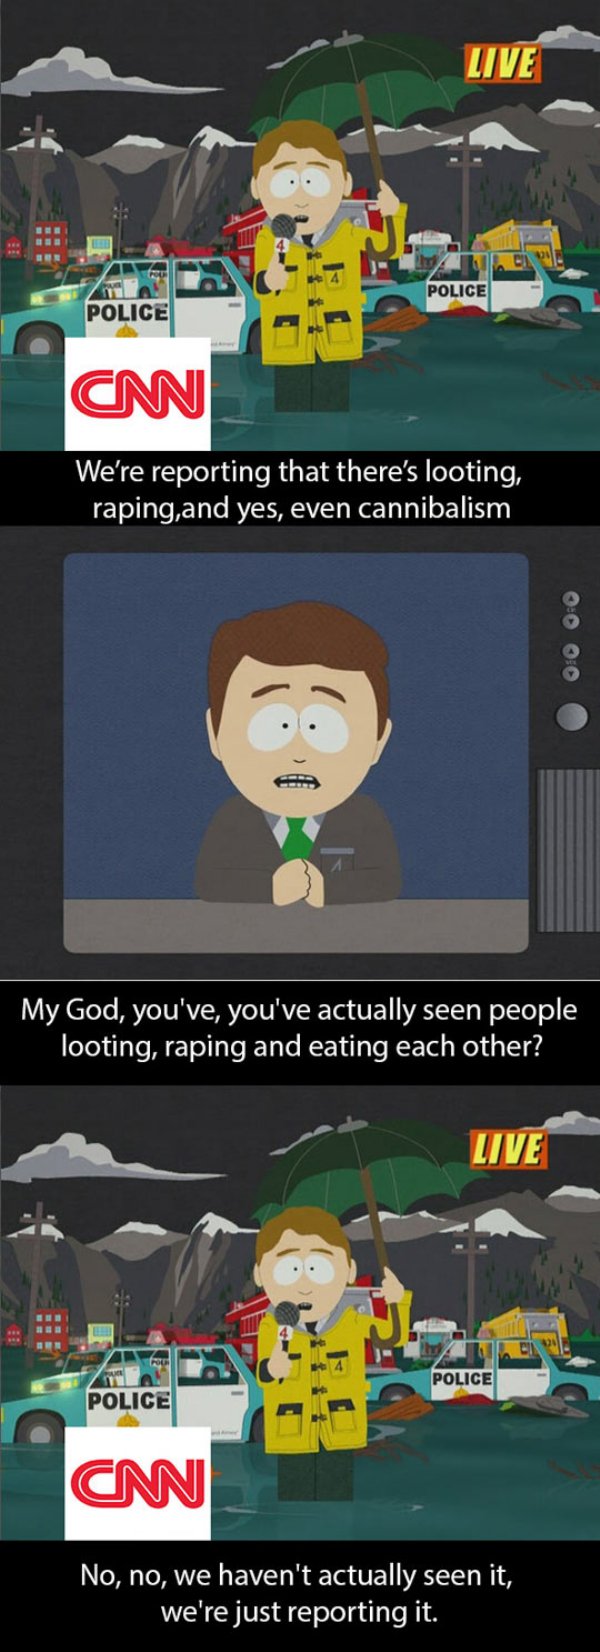 south park news cannibalism - Live Police Police Cm We're reporting that there's looting, raping, and yes, even cannibalism My God, you've, you've actually seen people looting, raping and eating each other? Live Police Police Cm No, no, we haven't actuall